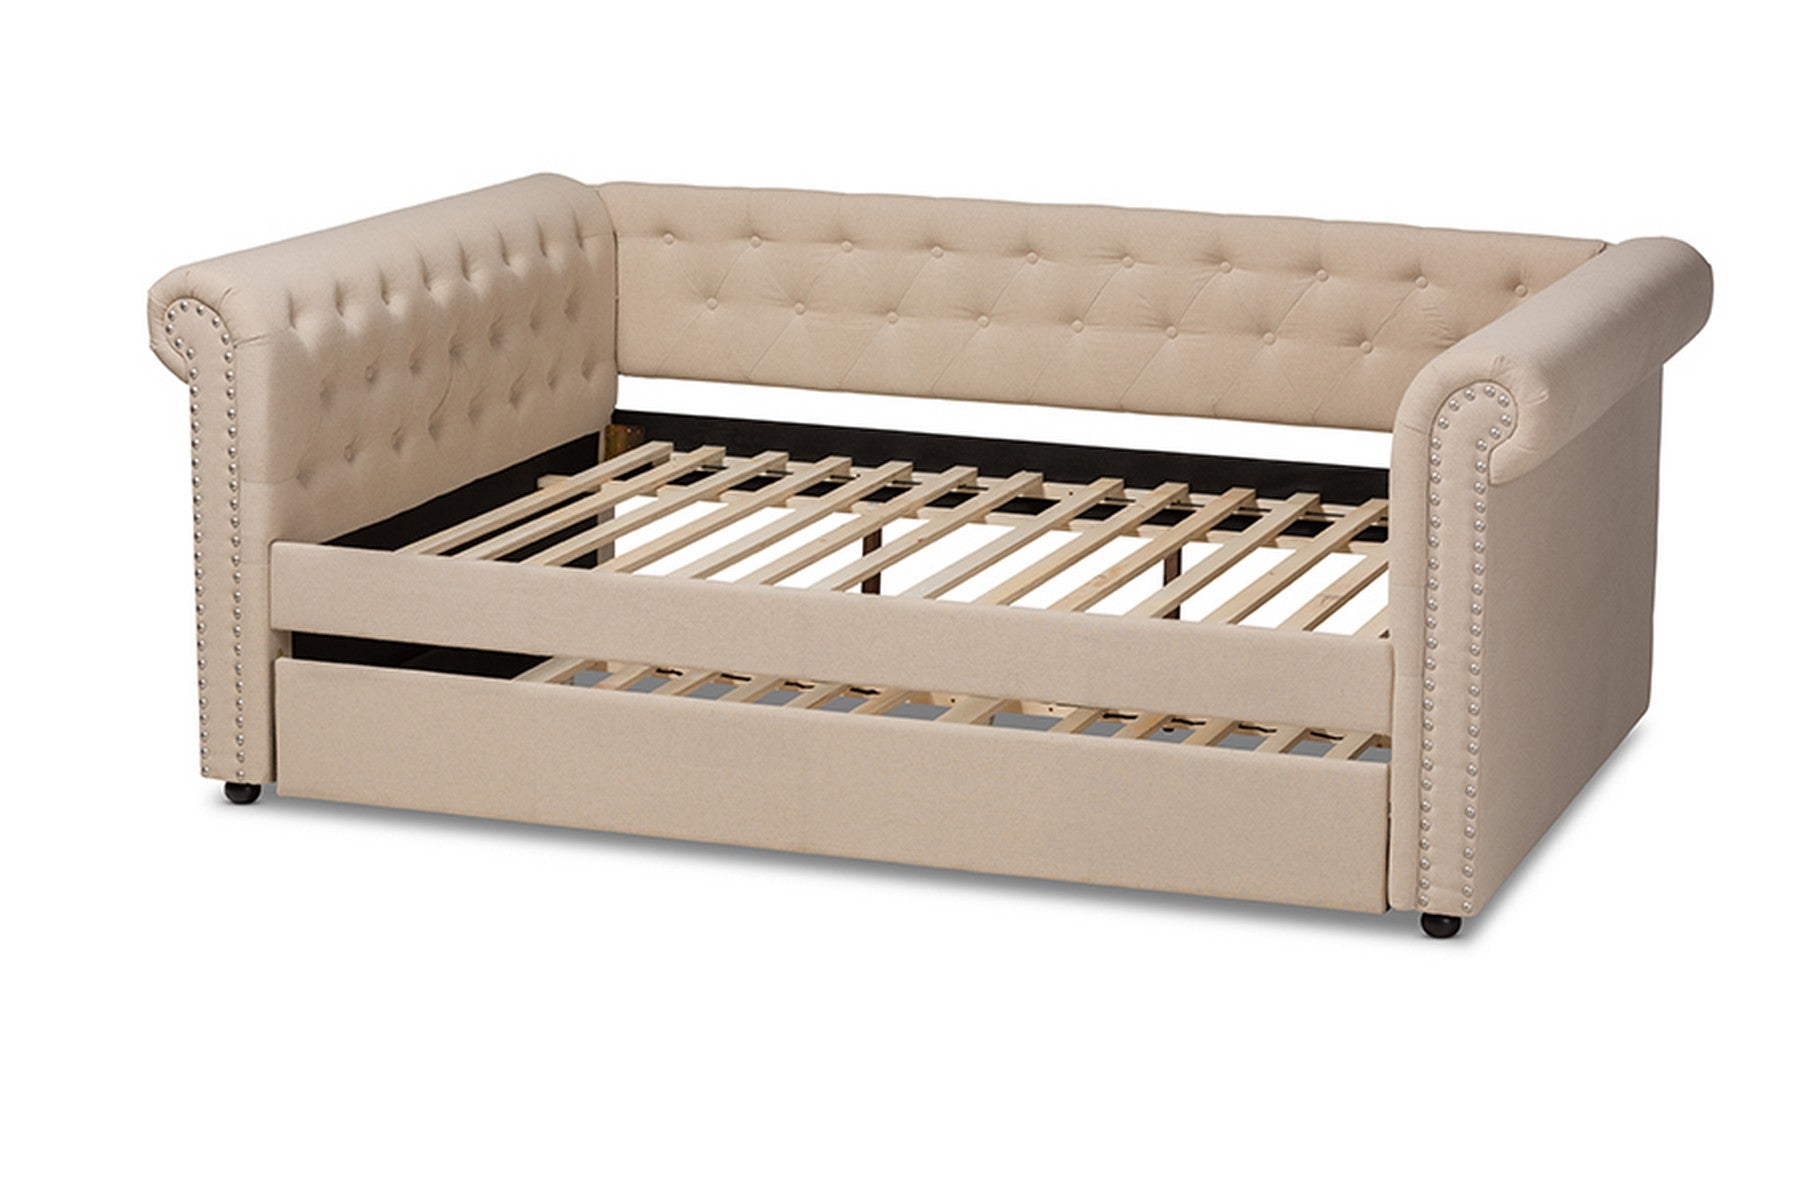 Baxton Studio Mabelle Modern and Contemporary Beige Fabric Upholstered Full Size Daybed with Trundle